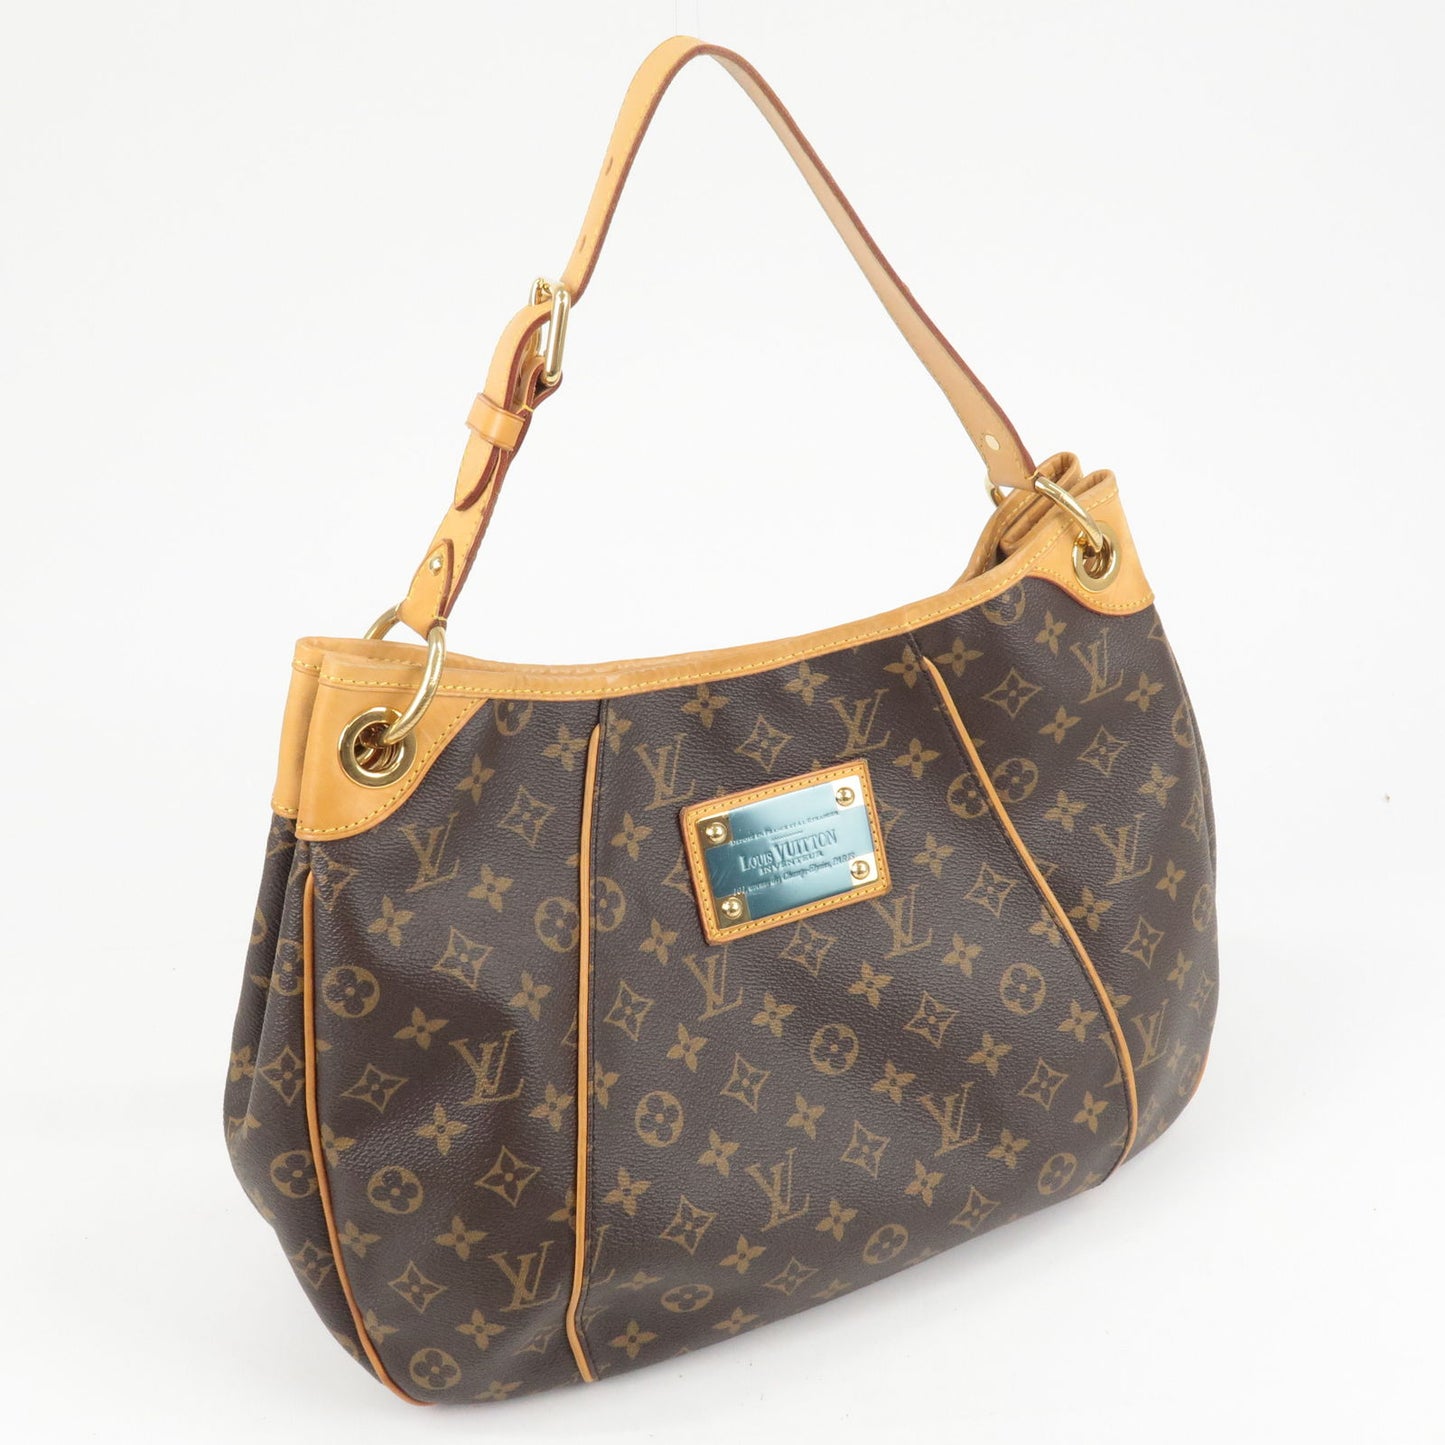 Pre-owned Louis Vuitton 2009 Galliera Pm Tote Bag In Brown